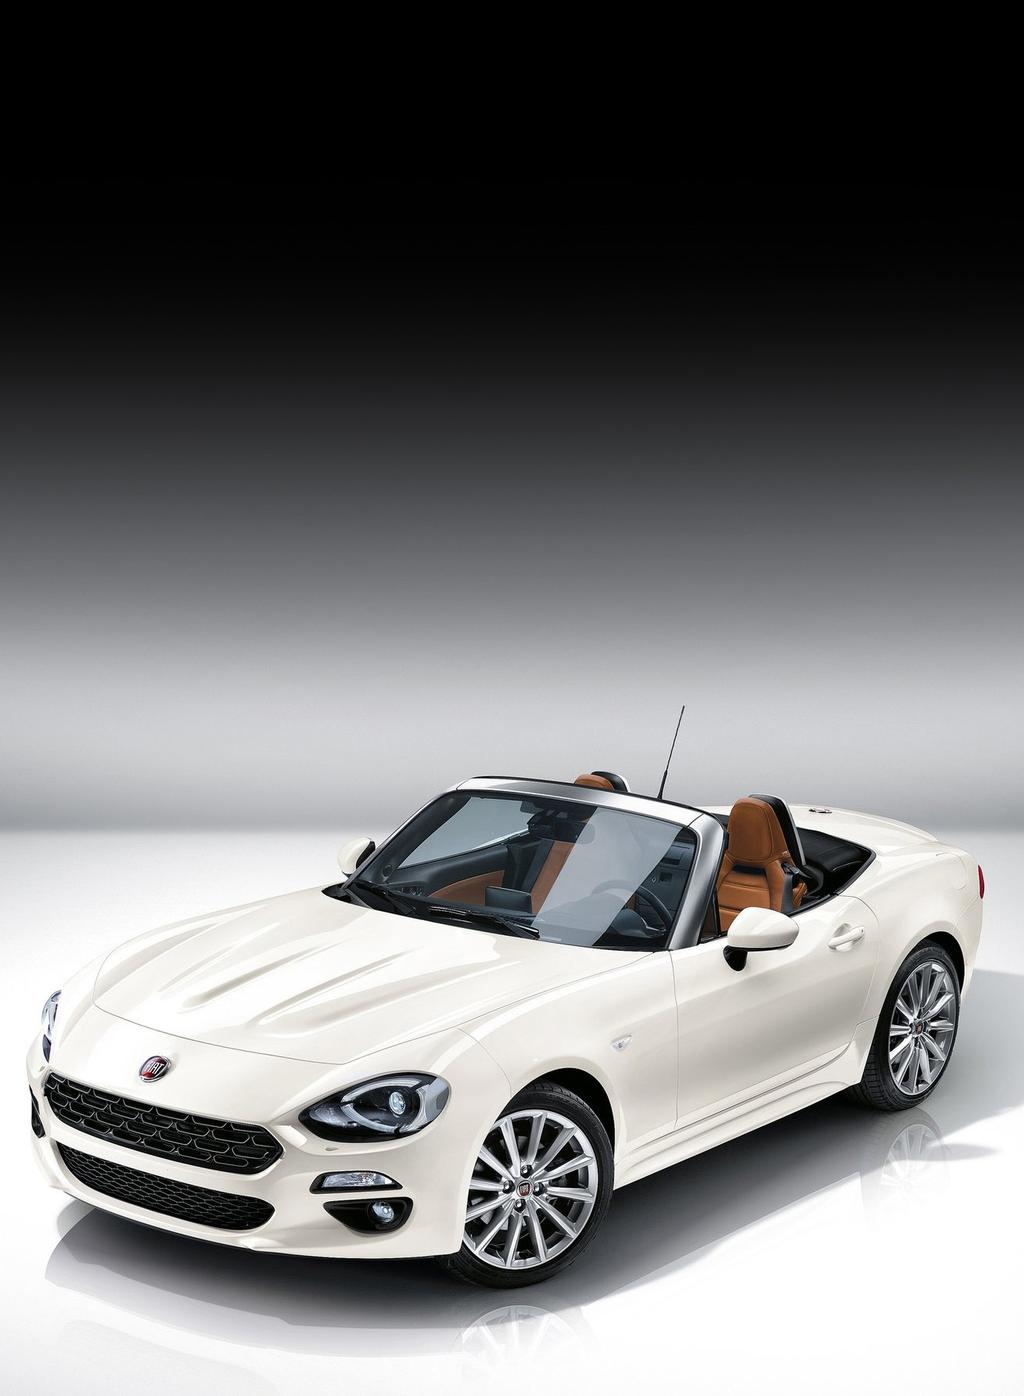 FIAT 124 SPIDER 2016 The all new FIAT 124 Spider is available to purchase now in the UK.